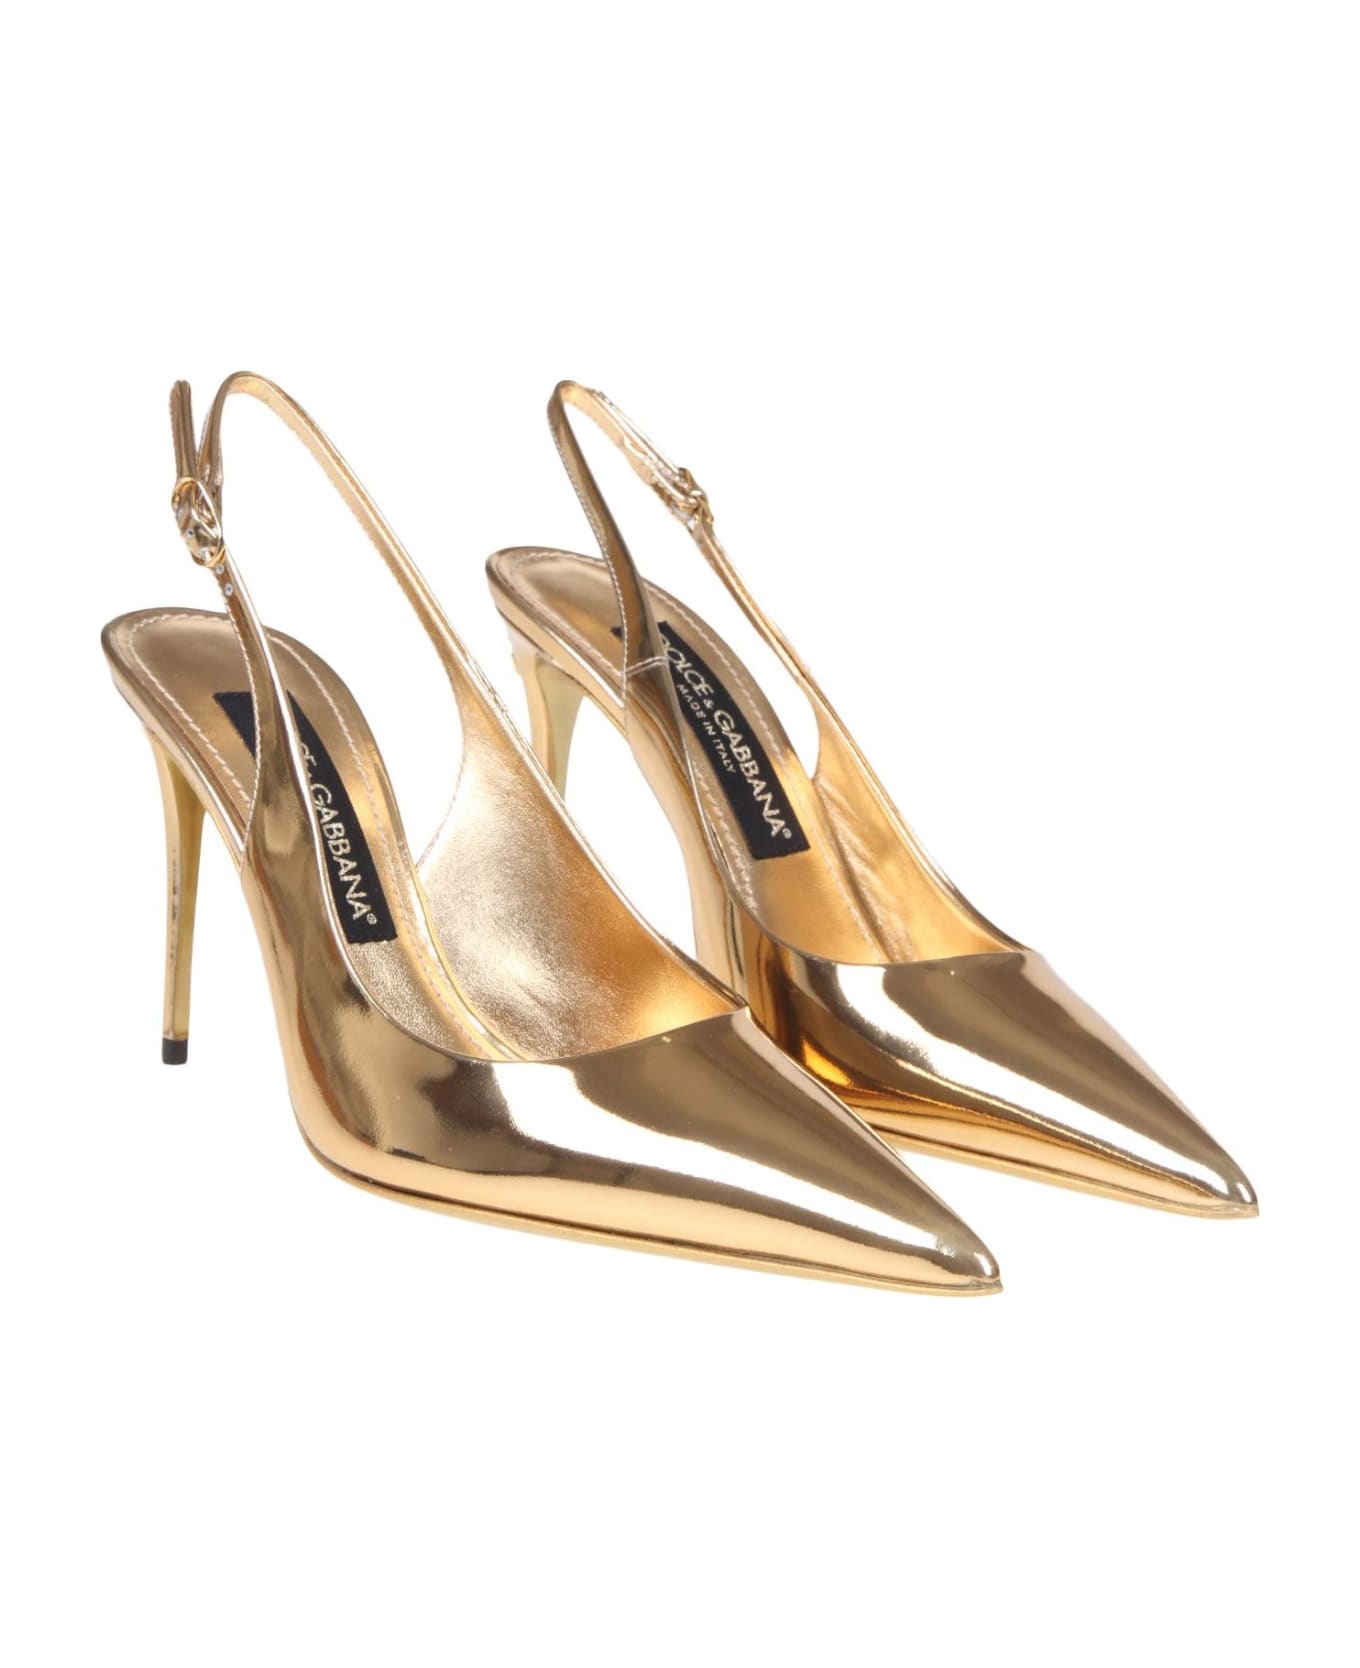 Dolce & Gabbana Slingback In Gold Mirror Leather - Light gold ハイヒール